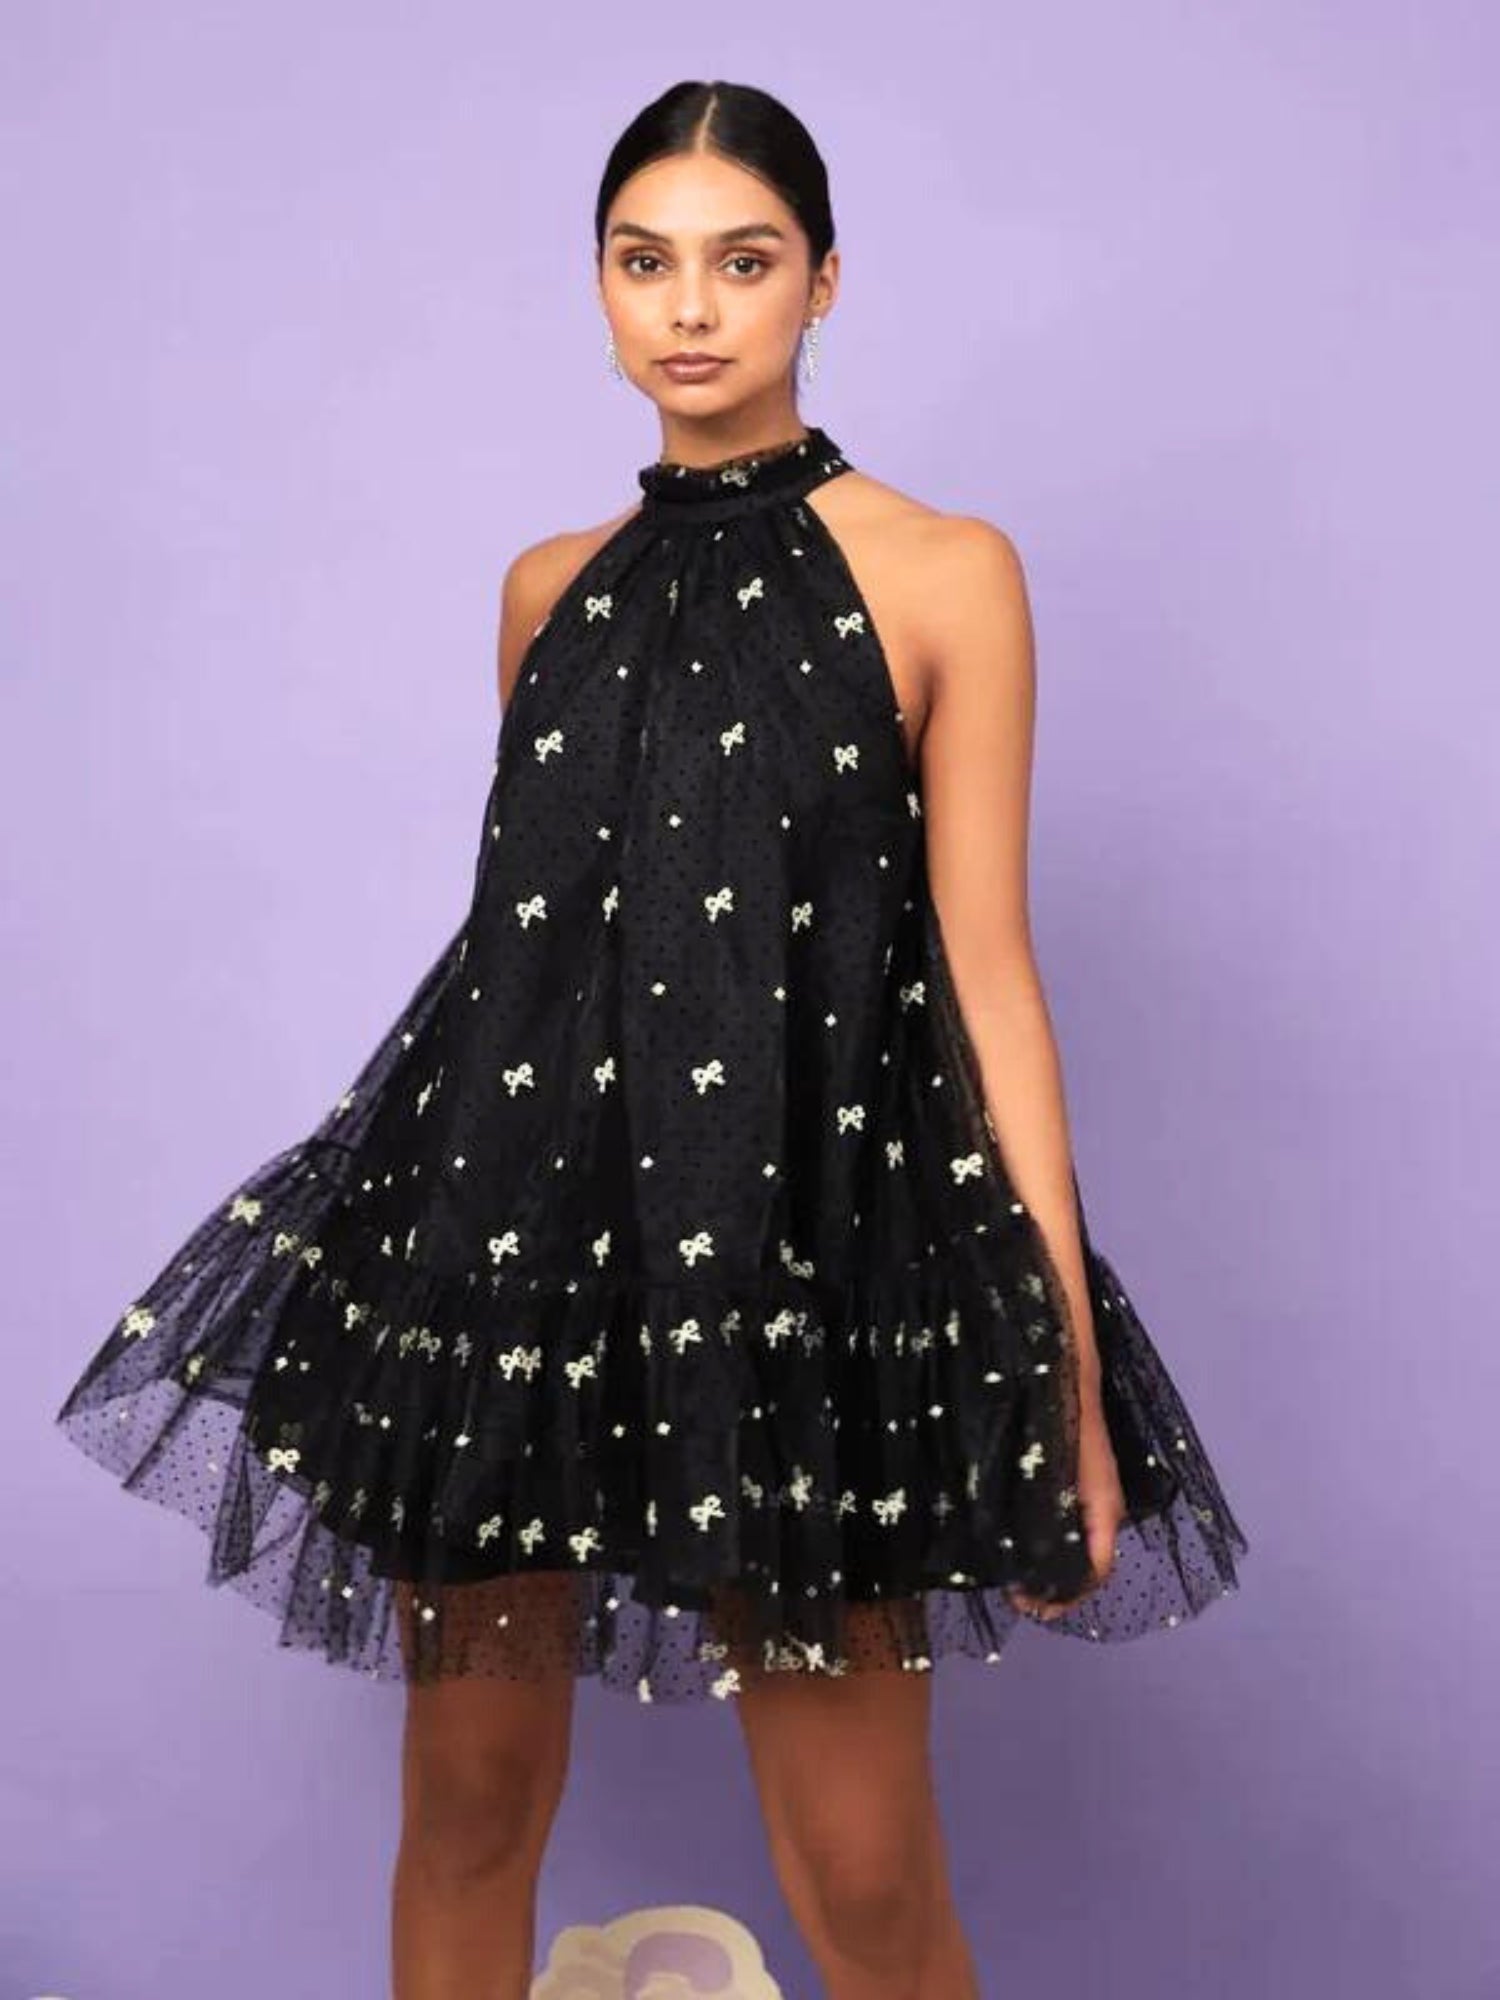 Twirl Embroidered Halter Neck Mini Dress - The silhouette, the embroidery, the neckline...absolute perfection. The Twirl Embroidered Halter Neck Mini Dress by Sister Jane features a halter neck dress in a flocked polka dot tulle fabric with gold bow embro